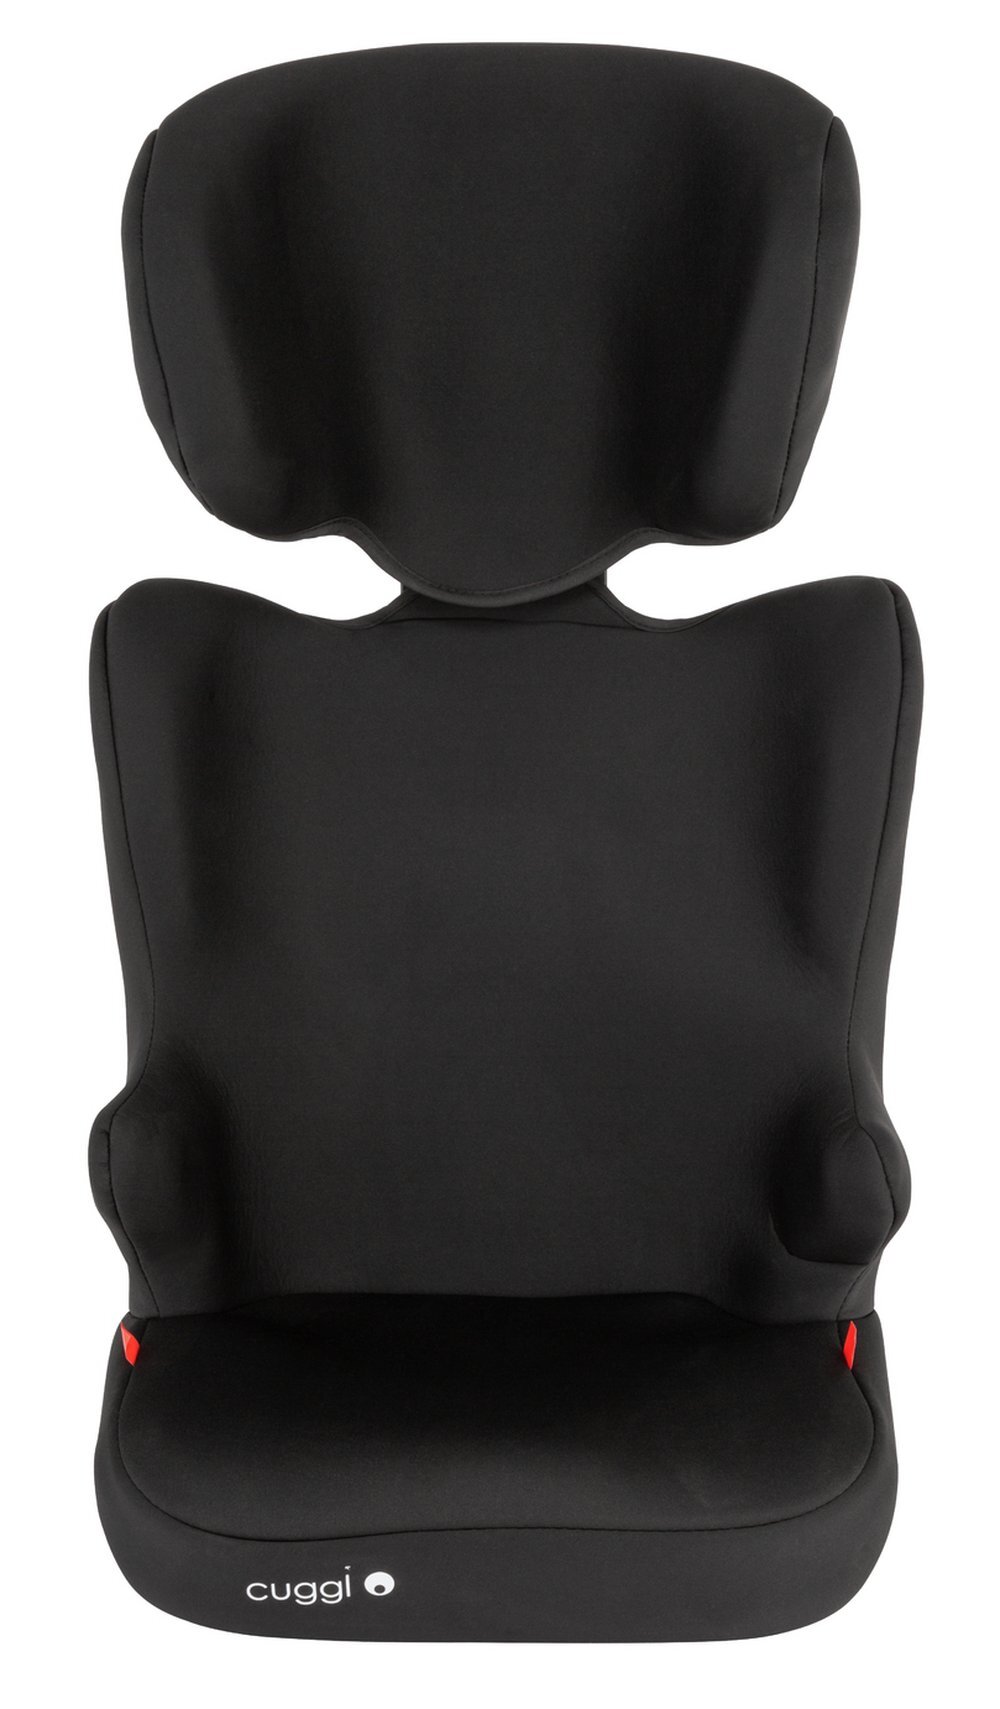 BRAND NEW CUGGL SWALLOW GROUP 2/3 BABY CAR SEAT 18PCS £12.49each